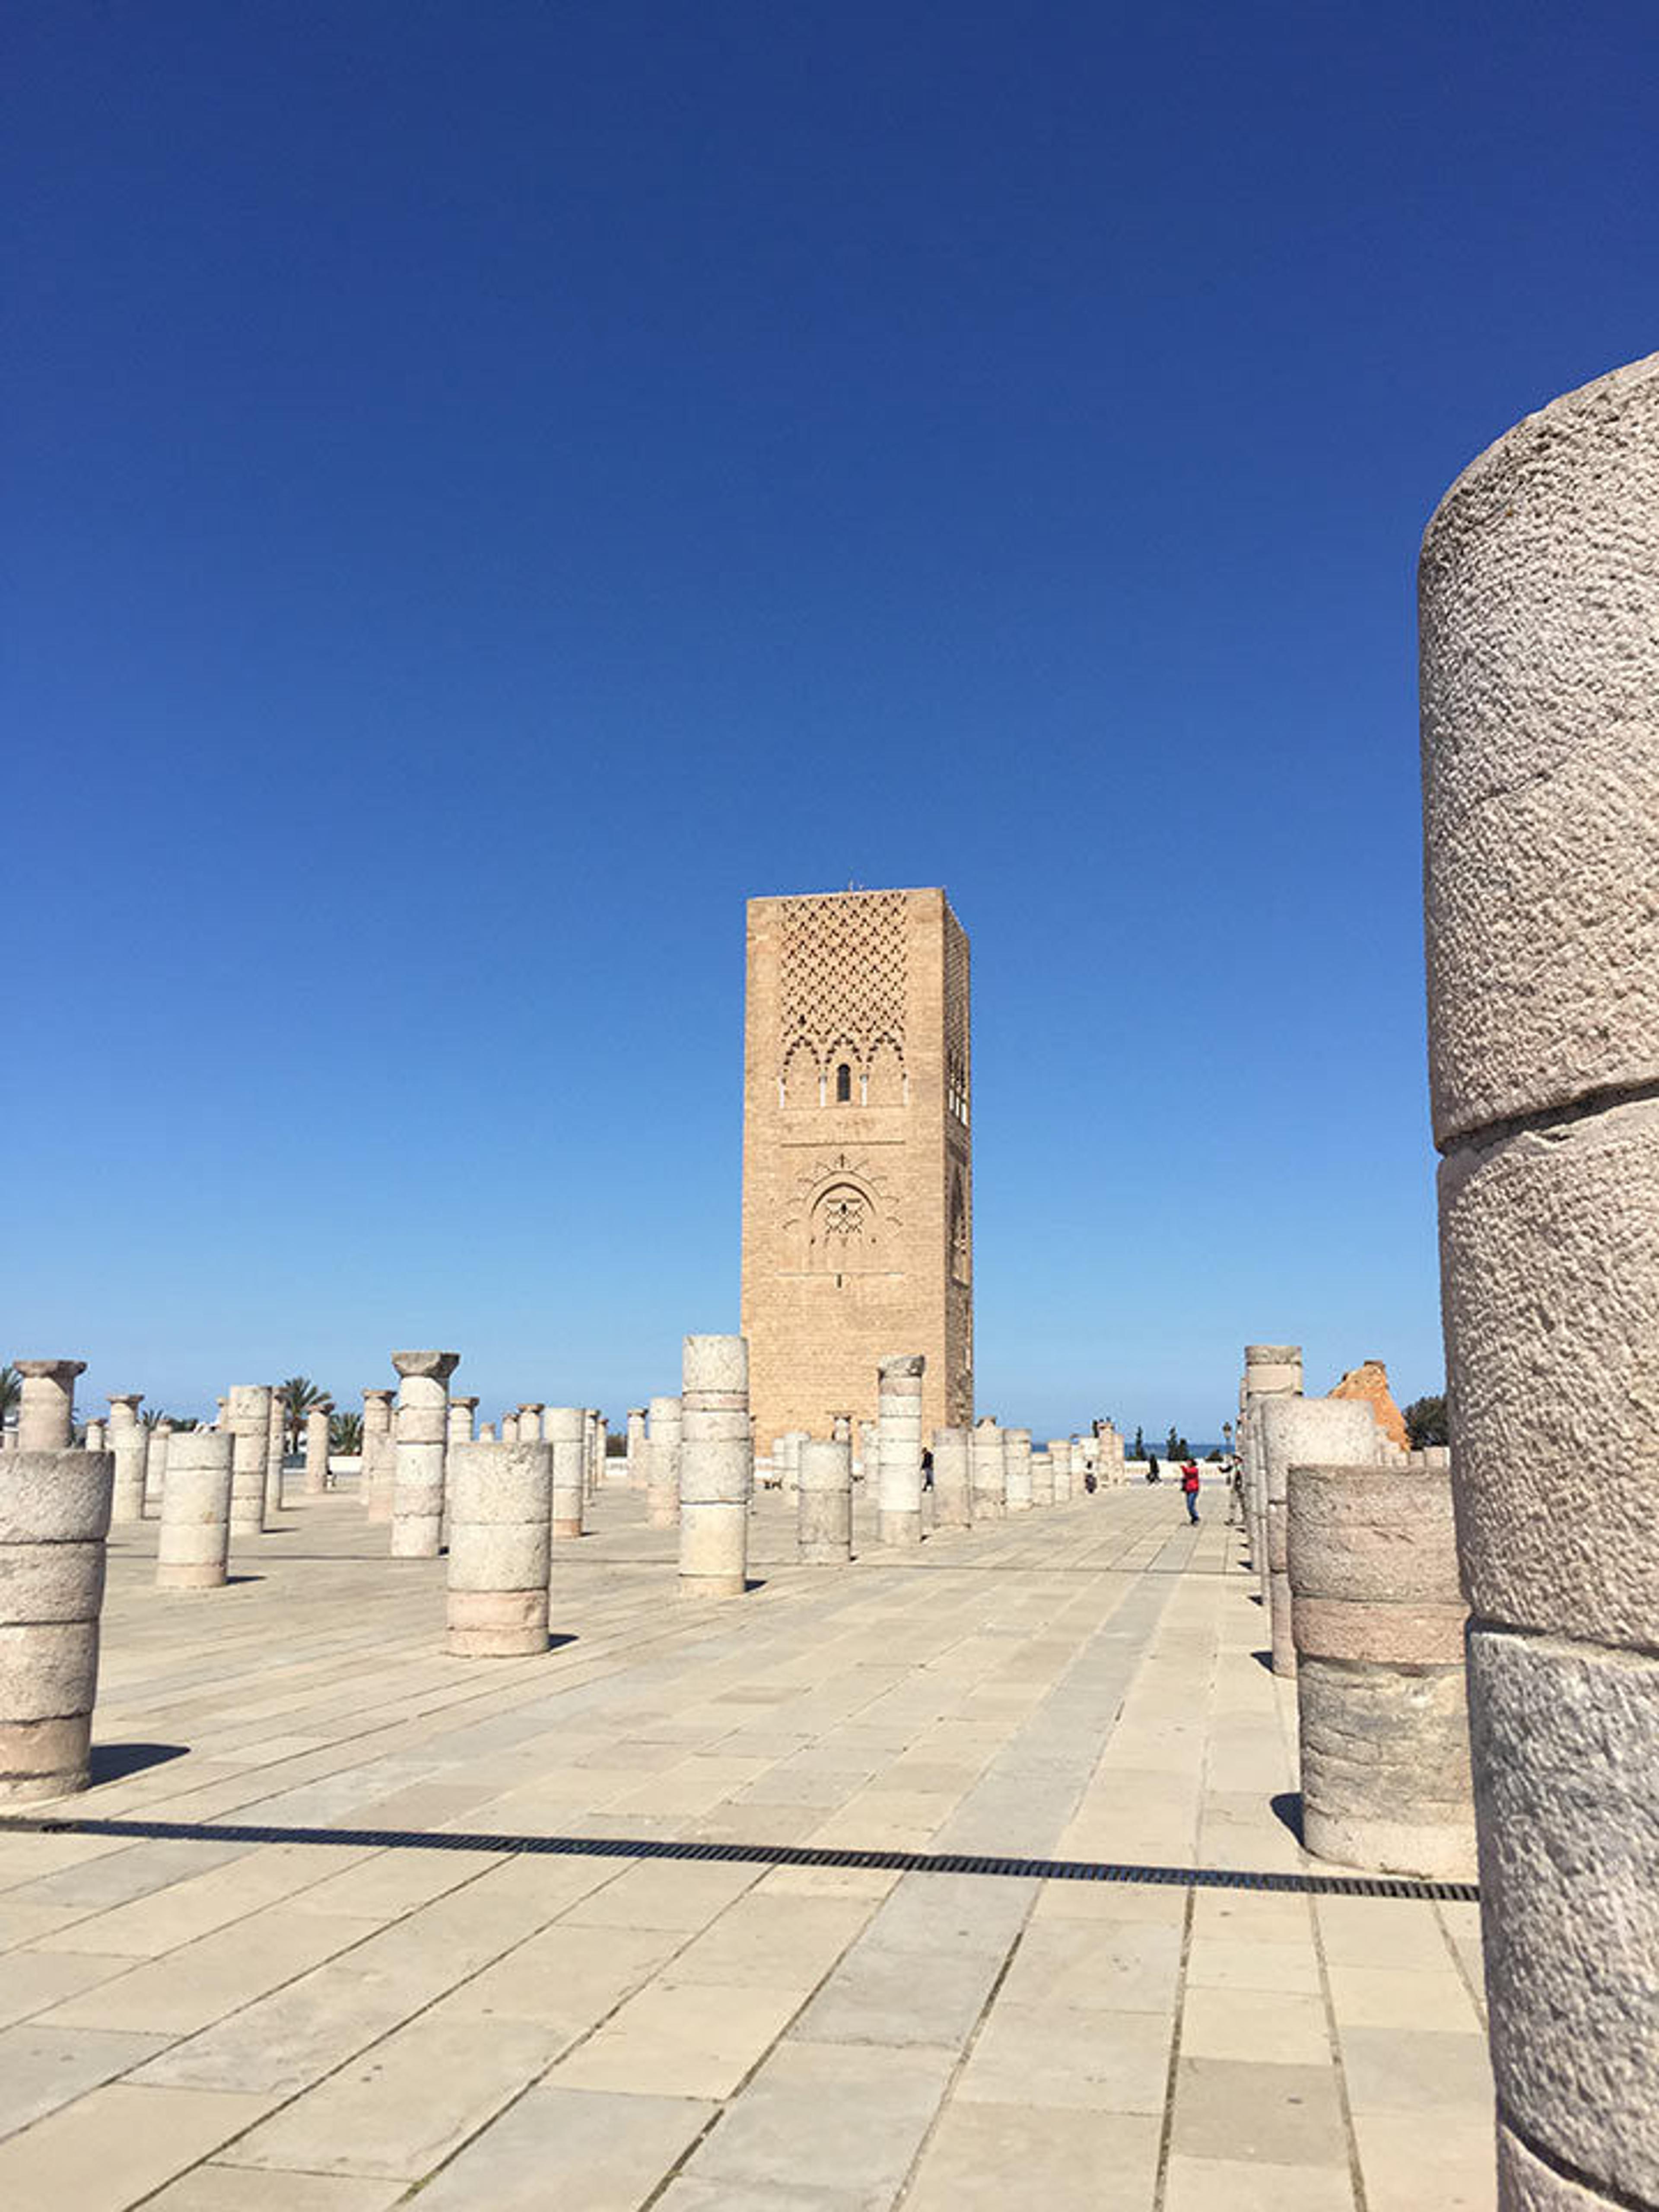 View of the Hassan Tower